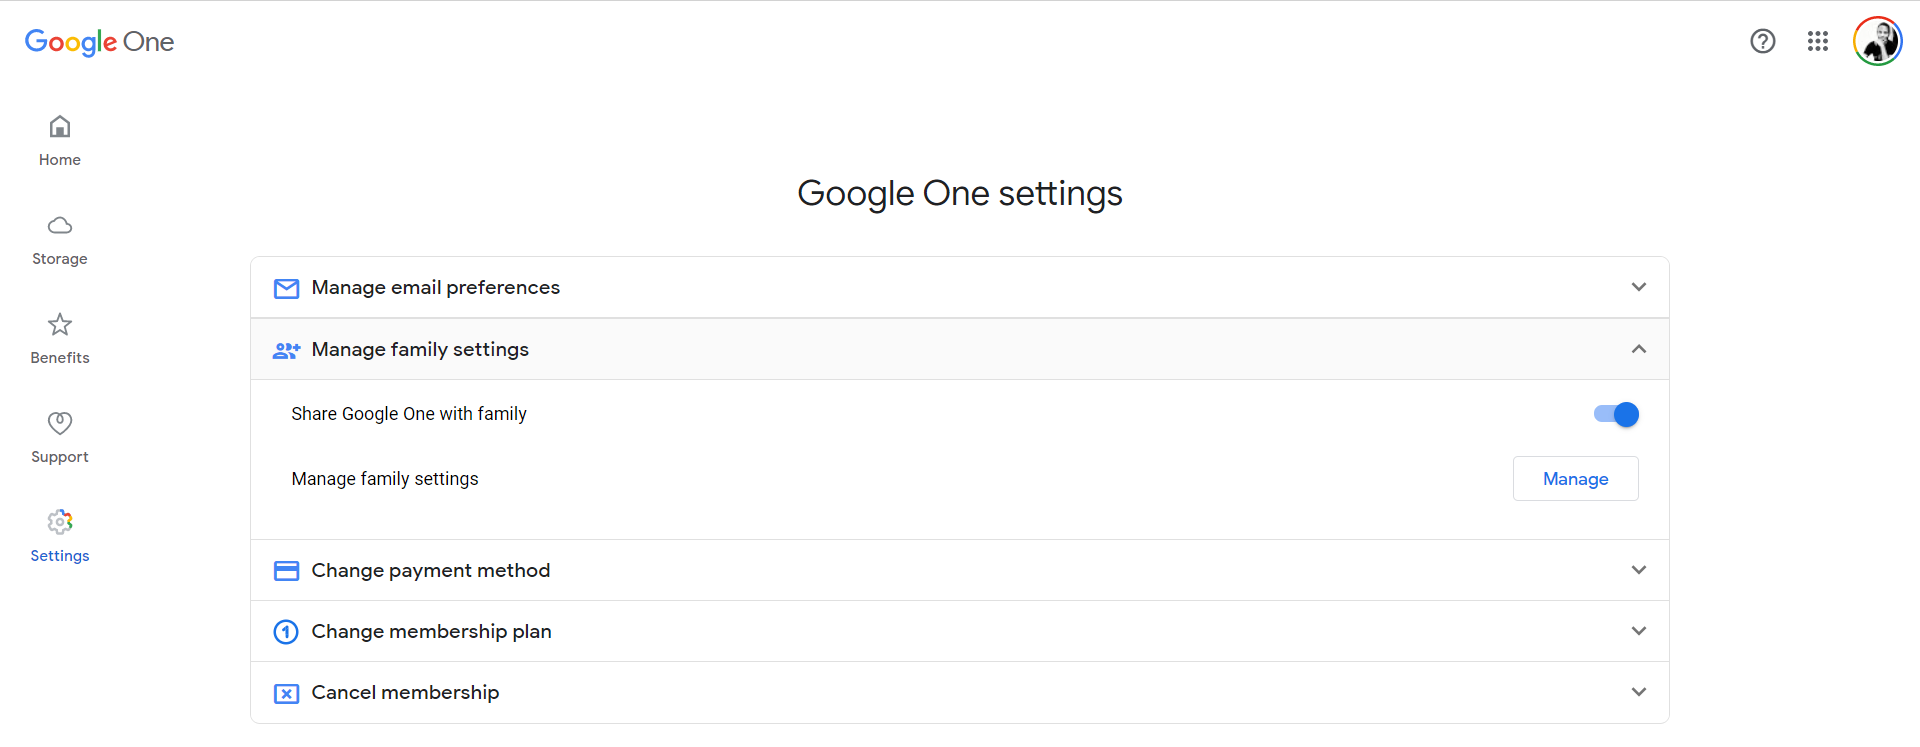 Sharing Google One with family